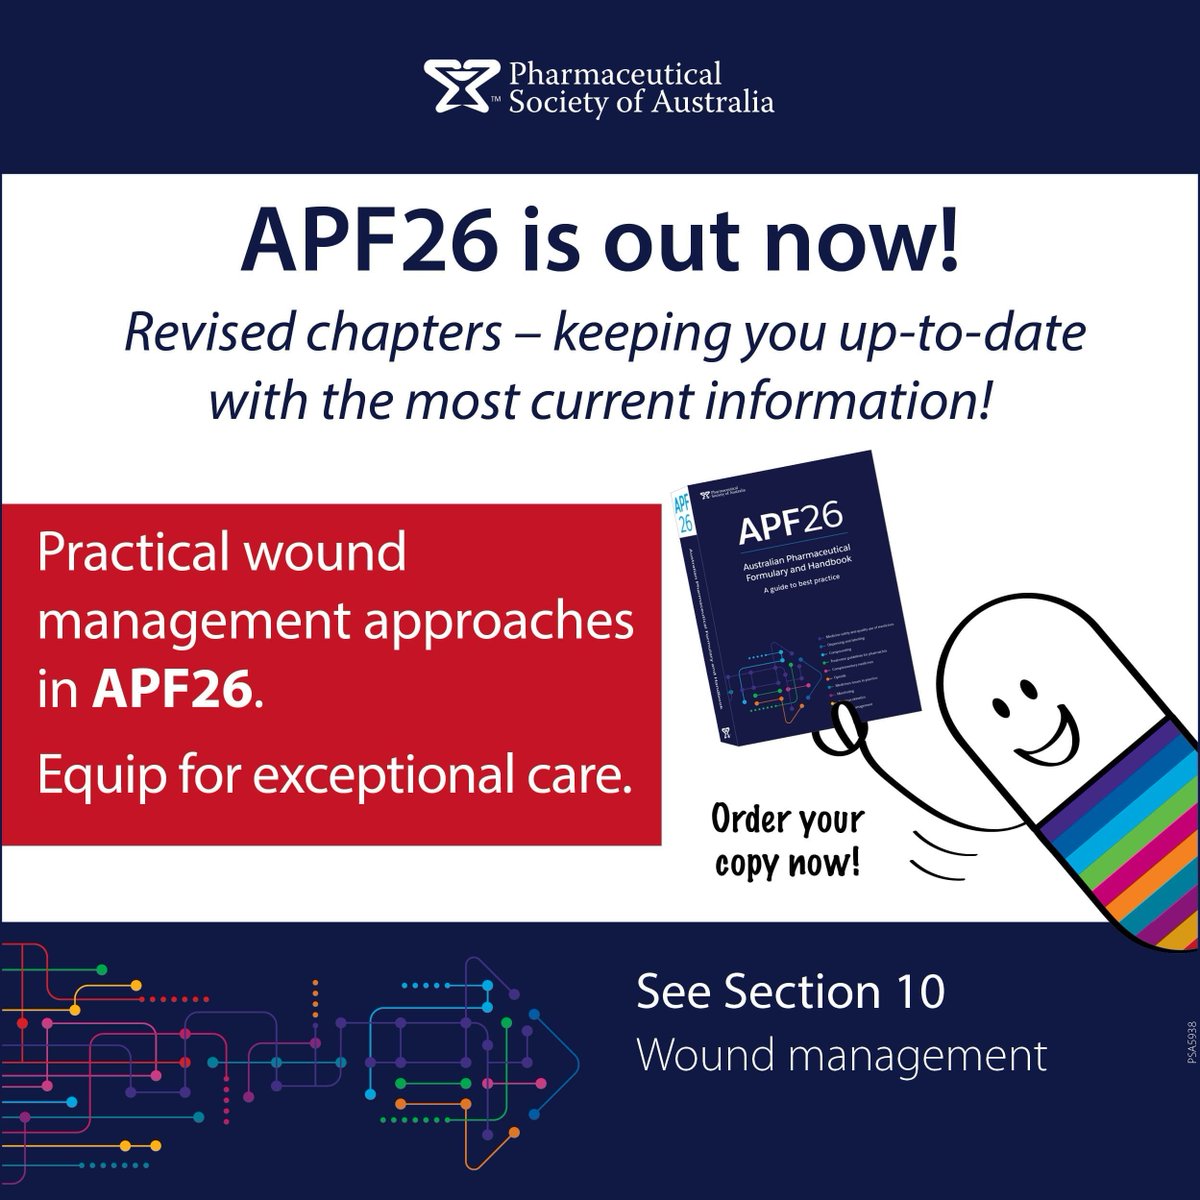 Equip for exceptional wound management with APF26's practical approaches. Elevate your care - order now for detailed guidance. Order here: buff.ly/43dYeAu